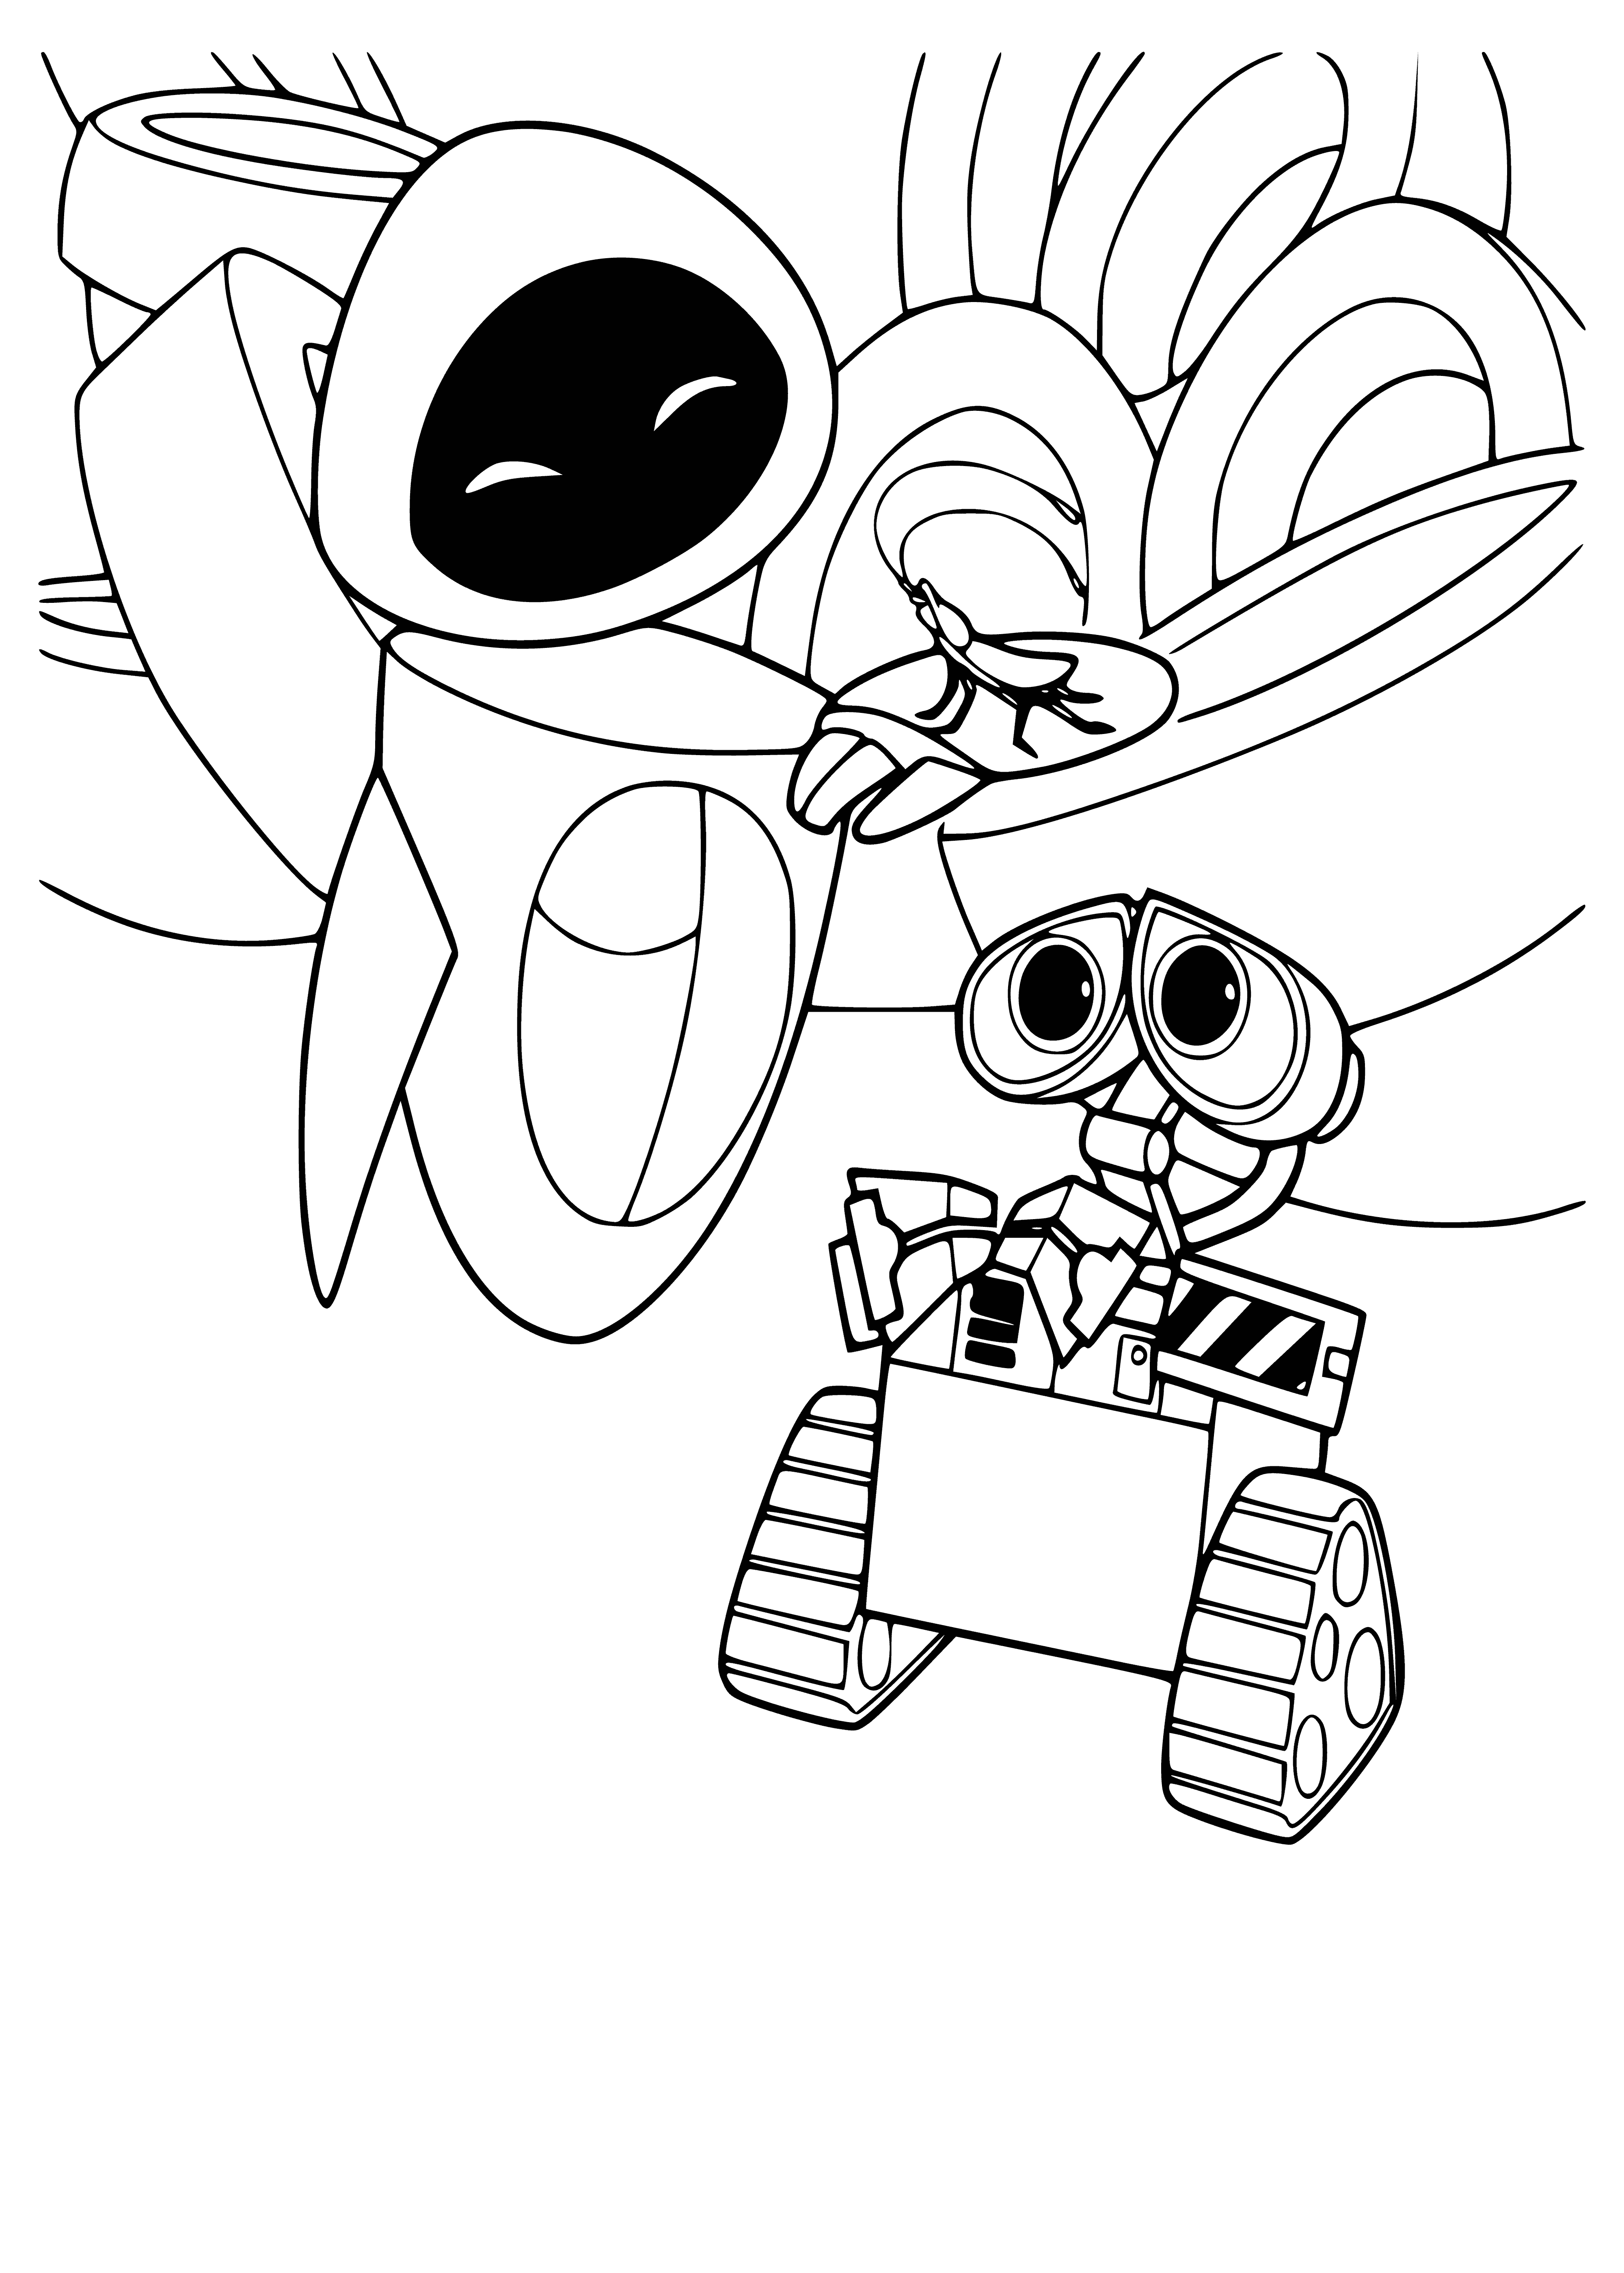 Eve and Wally coloring page